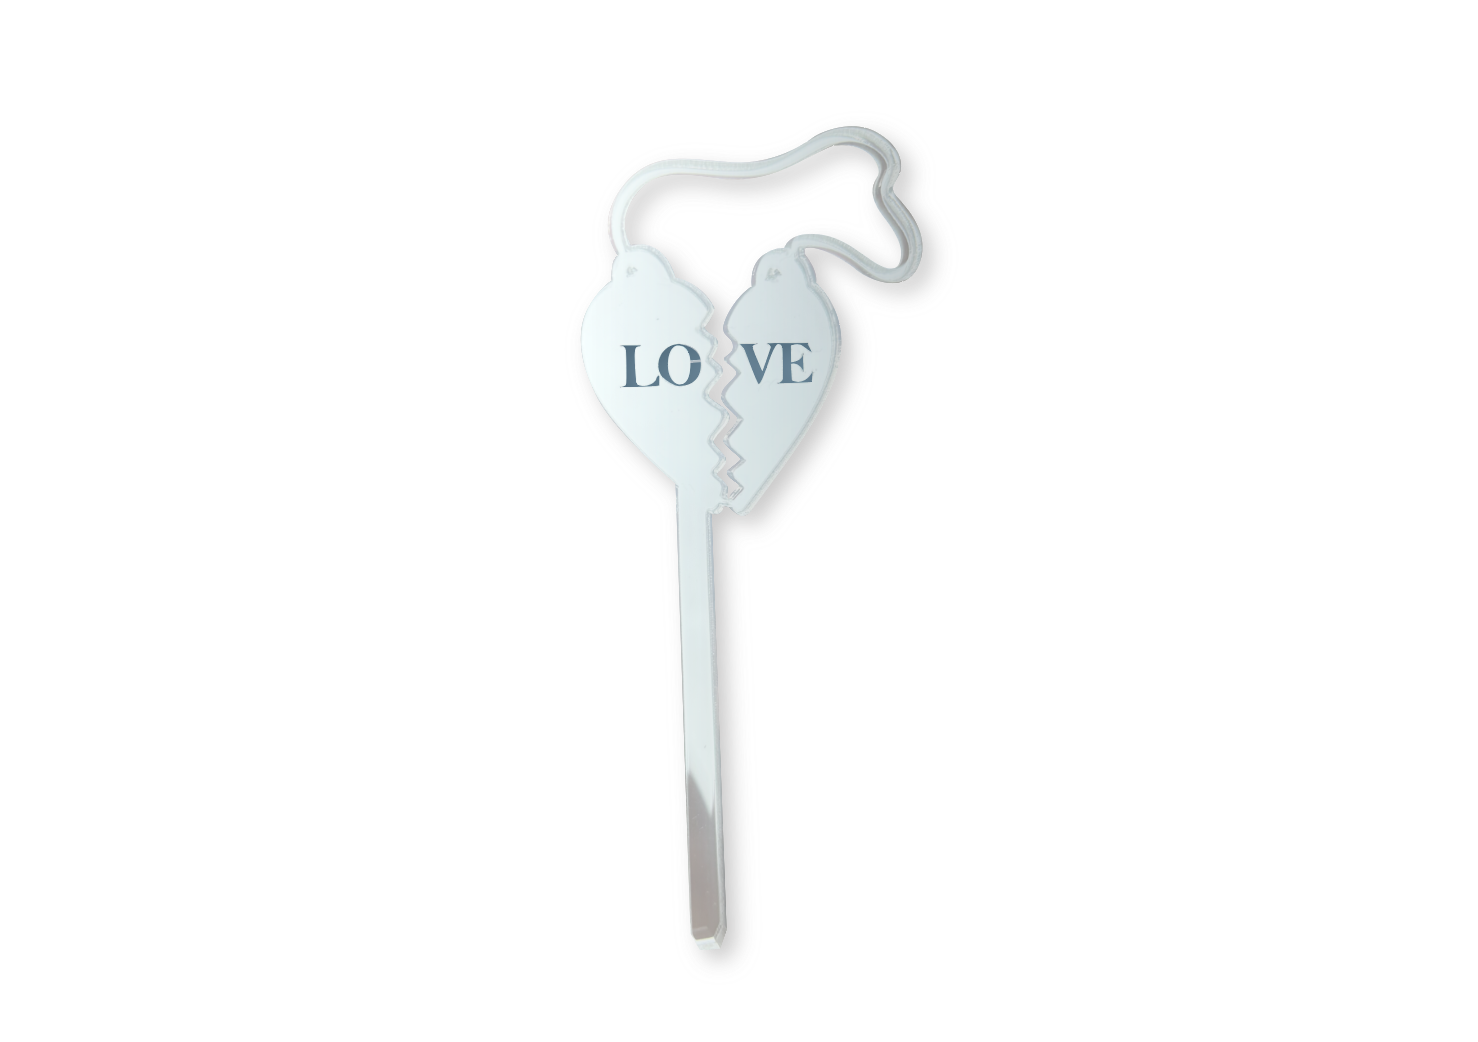 LITTLE LOVE - Cake Toppers (Sold Separately)